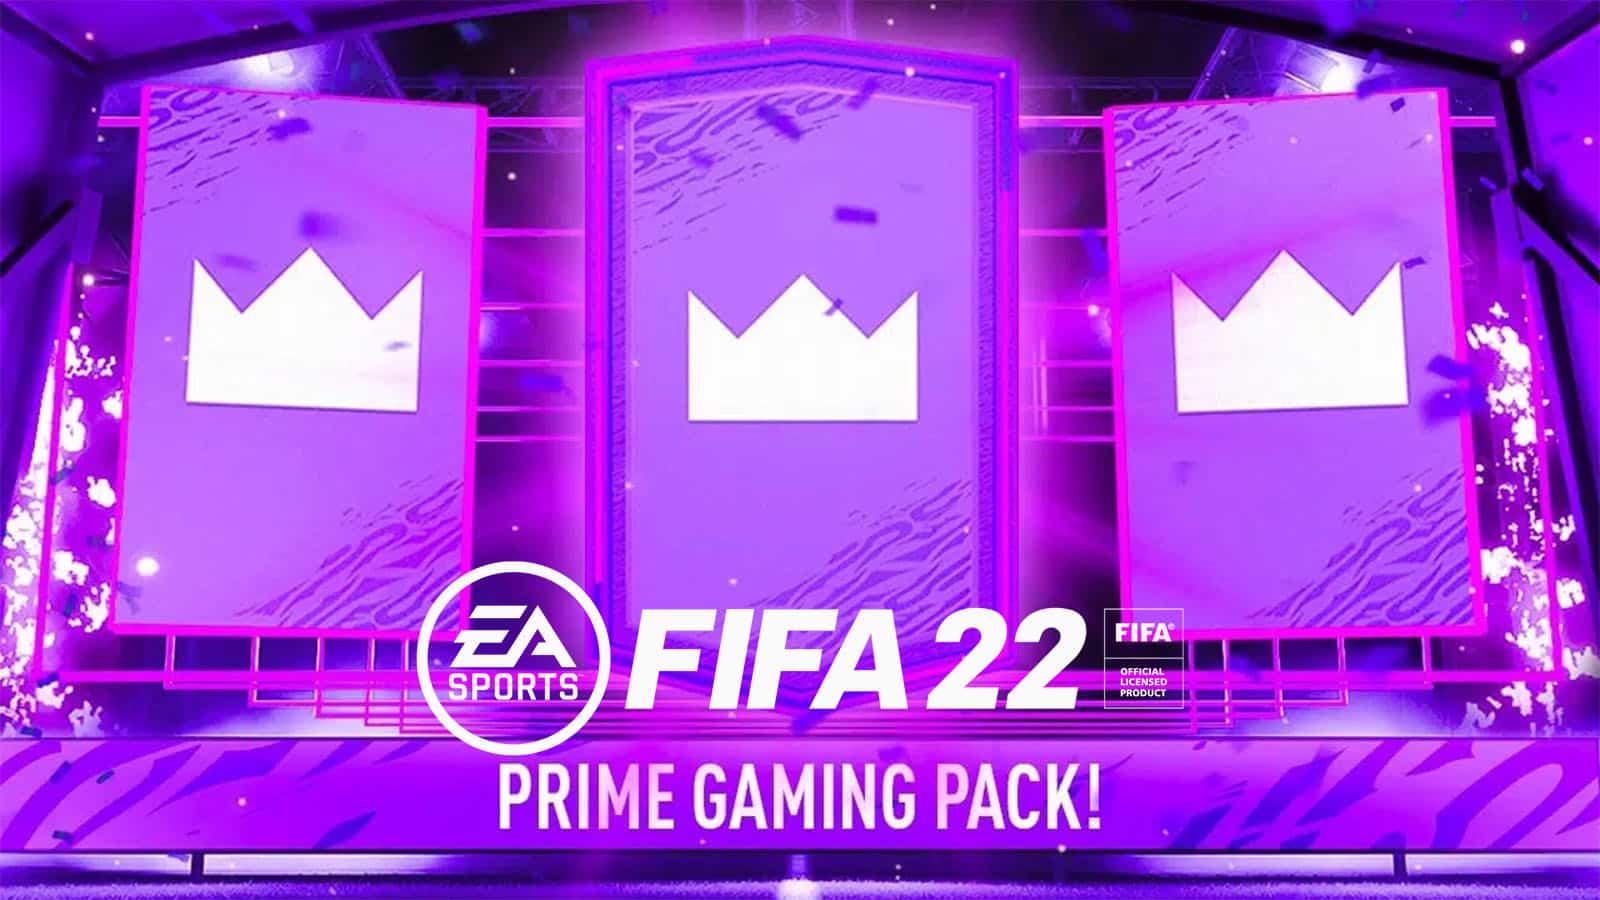 FIFA 22 Twitch Prime Gaming Packs